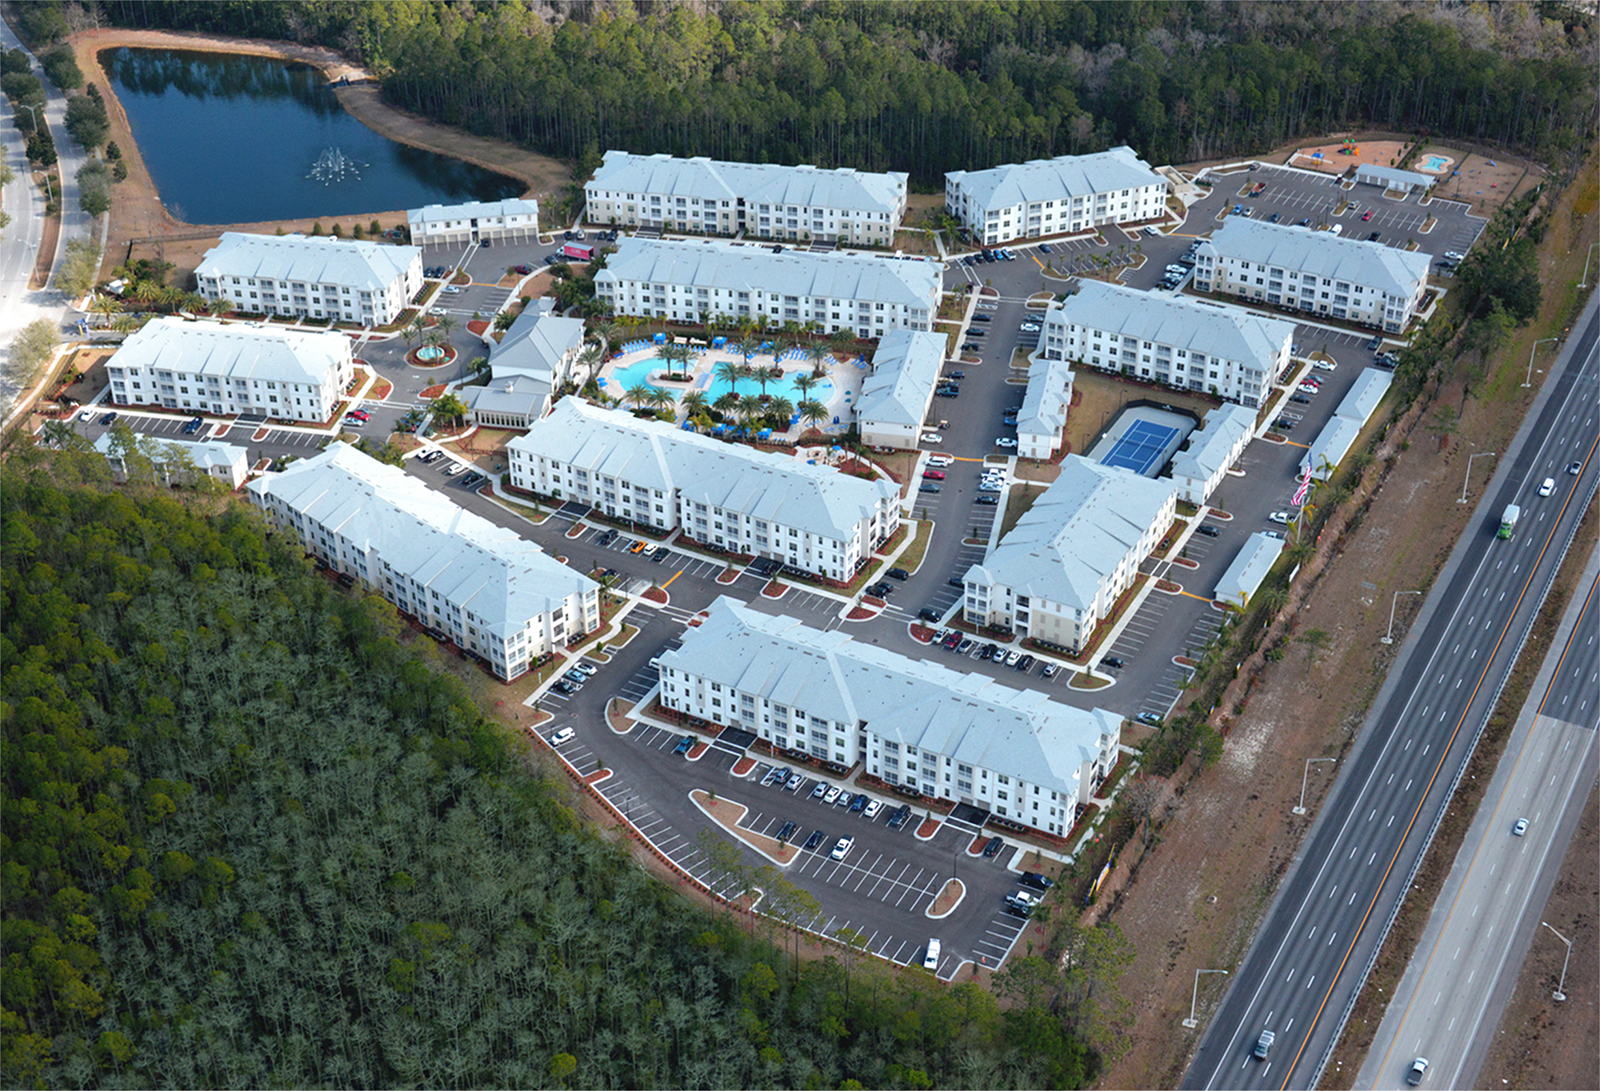 Aerial shot of apartment complex with pool area and palm trees